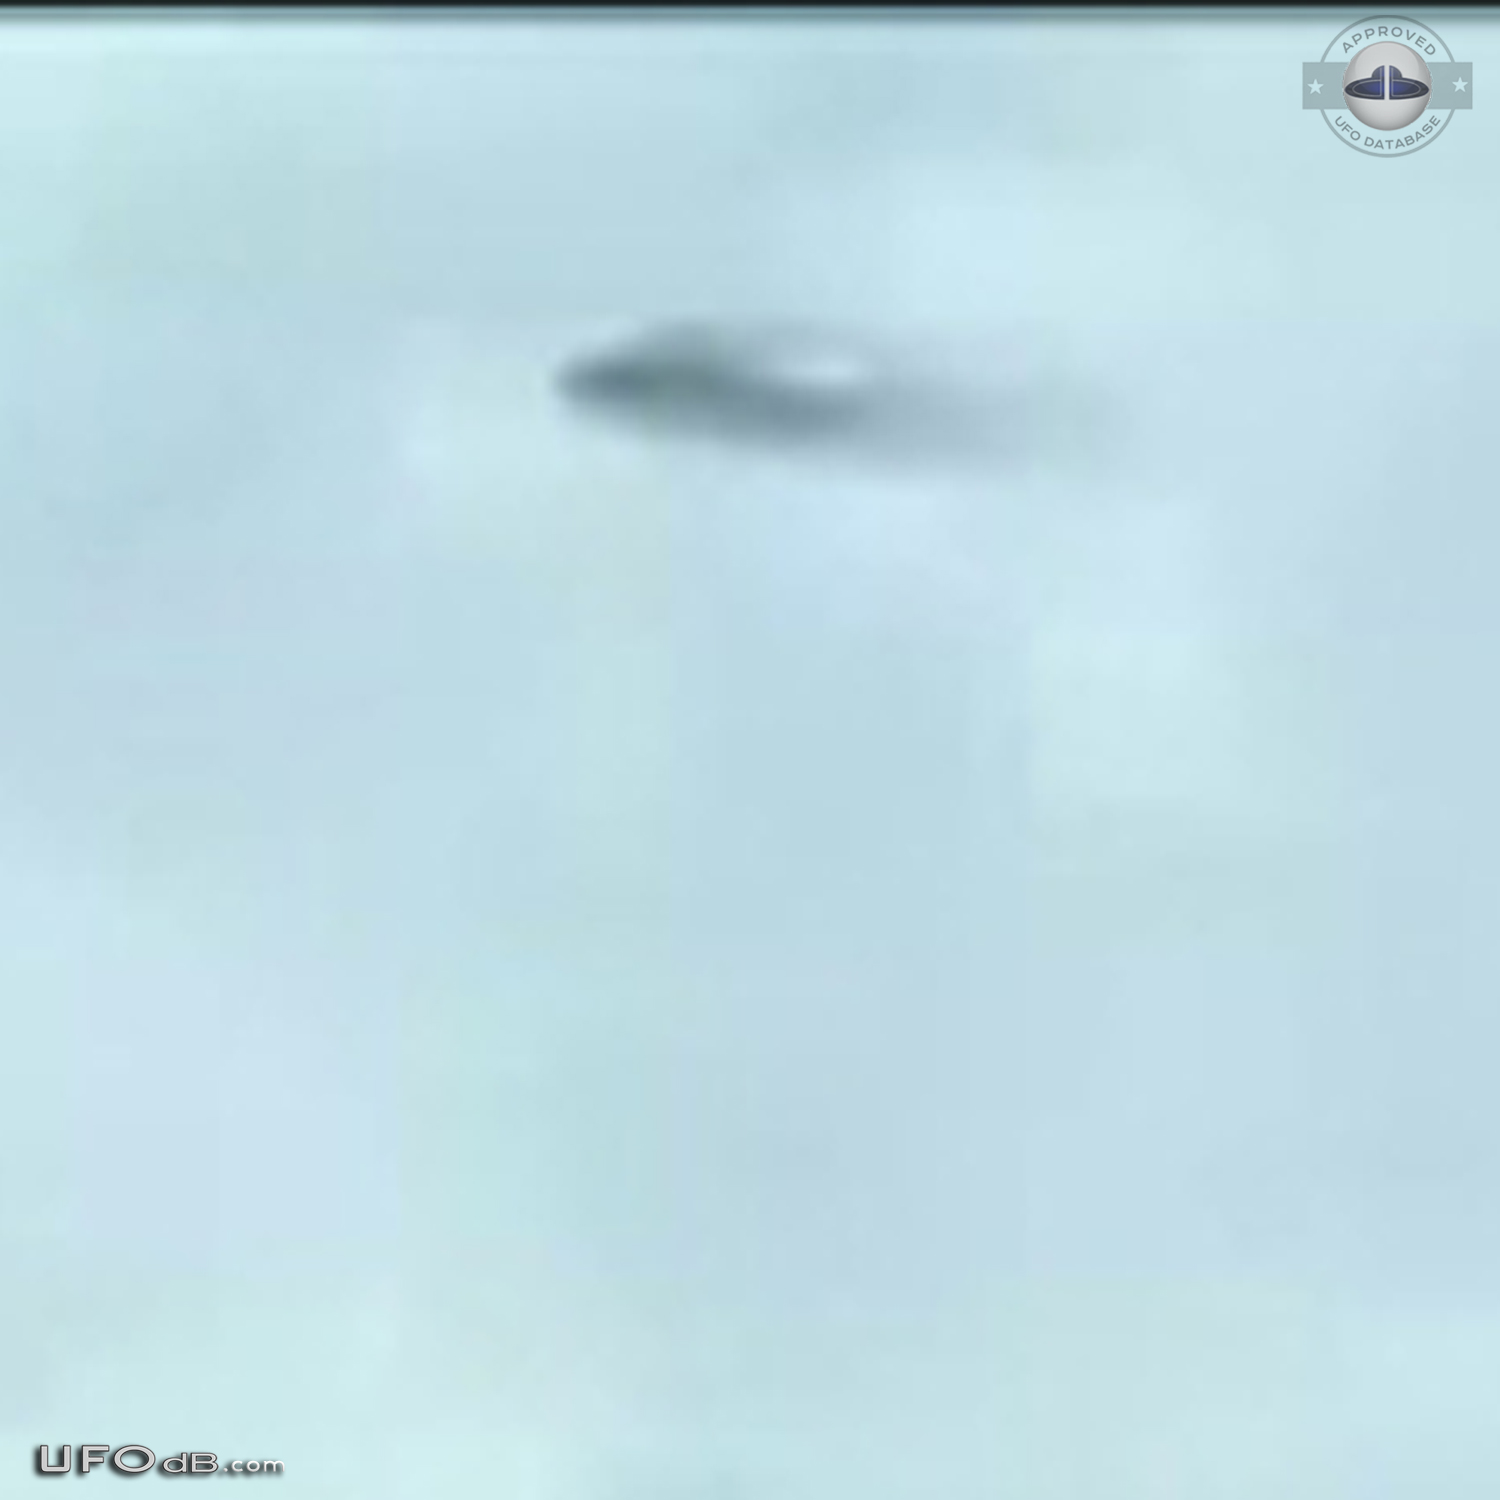 UFO picture from plane taking off Paris Charles de Gaulle airport 2013 UFO Picture #541-5